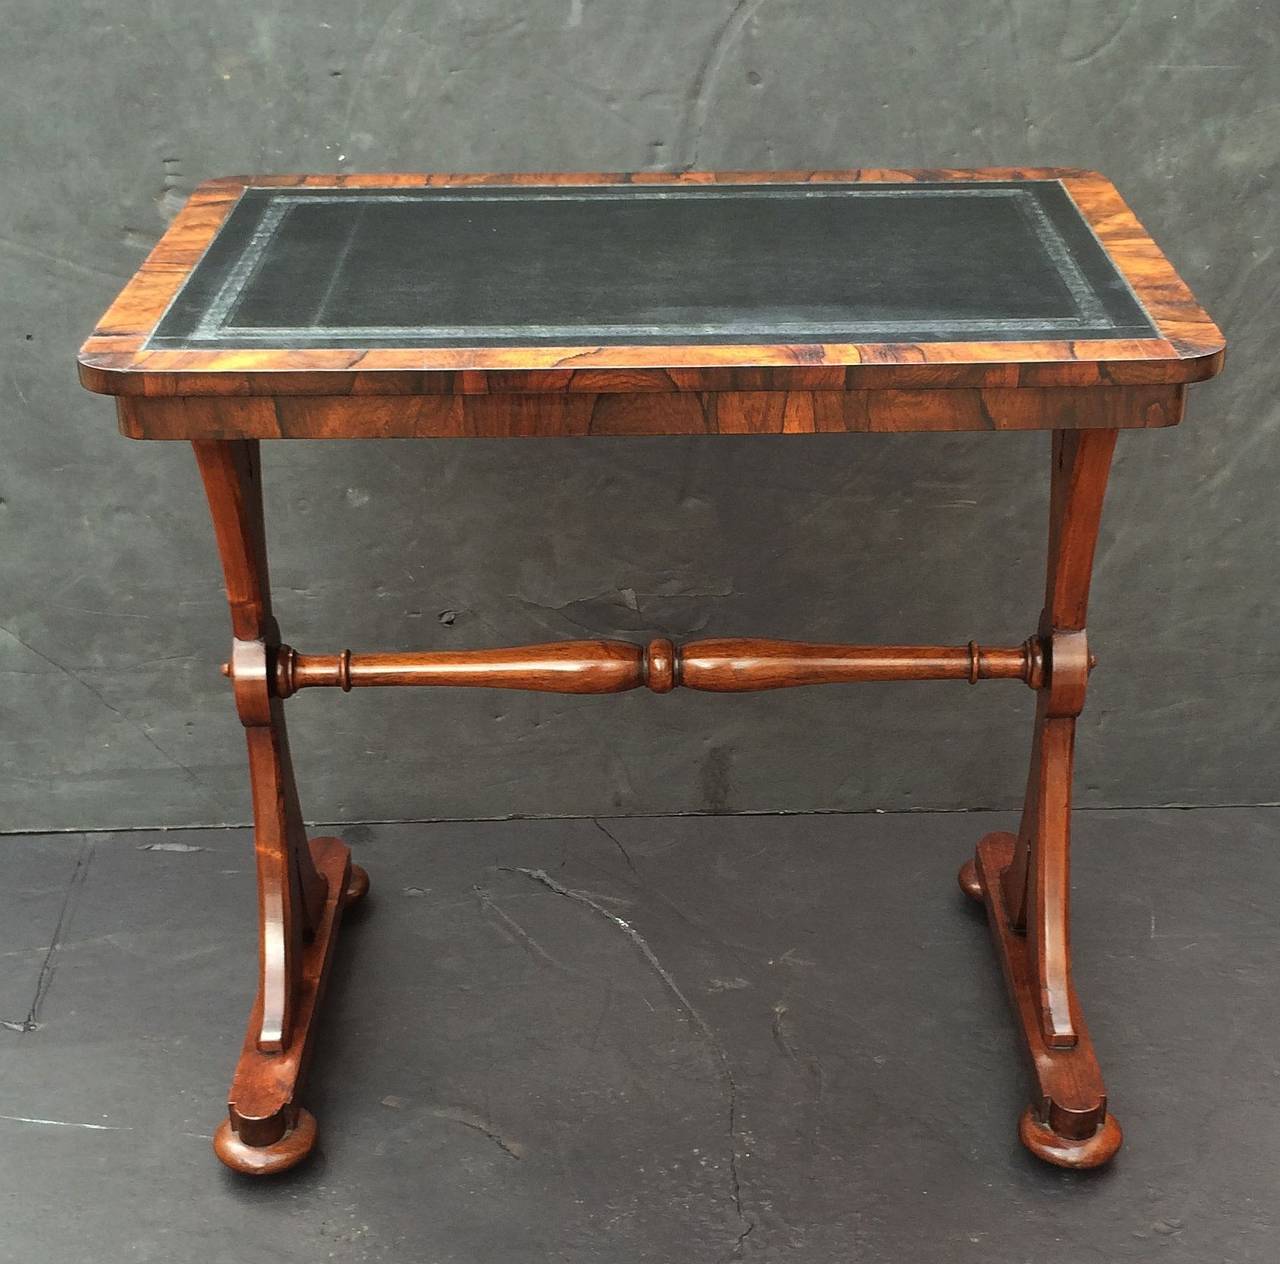 A handsome English writing or side table, featuring a moulded rosewood top with inset surface of embossed black leather, mounted to a frieze with turned support stand of rosewood.